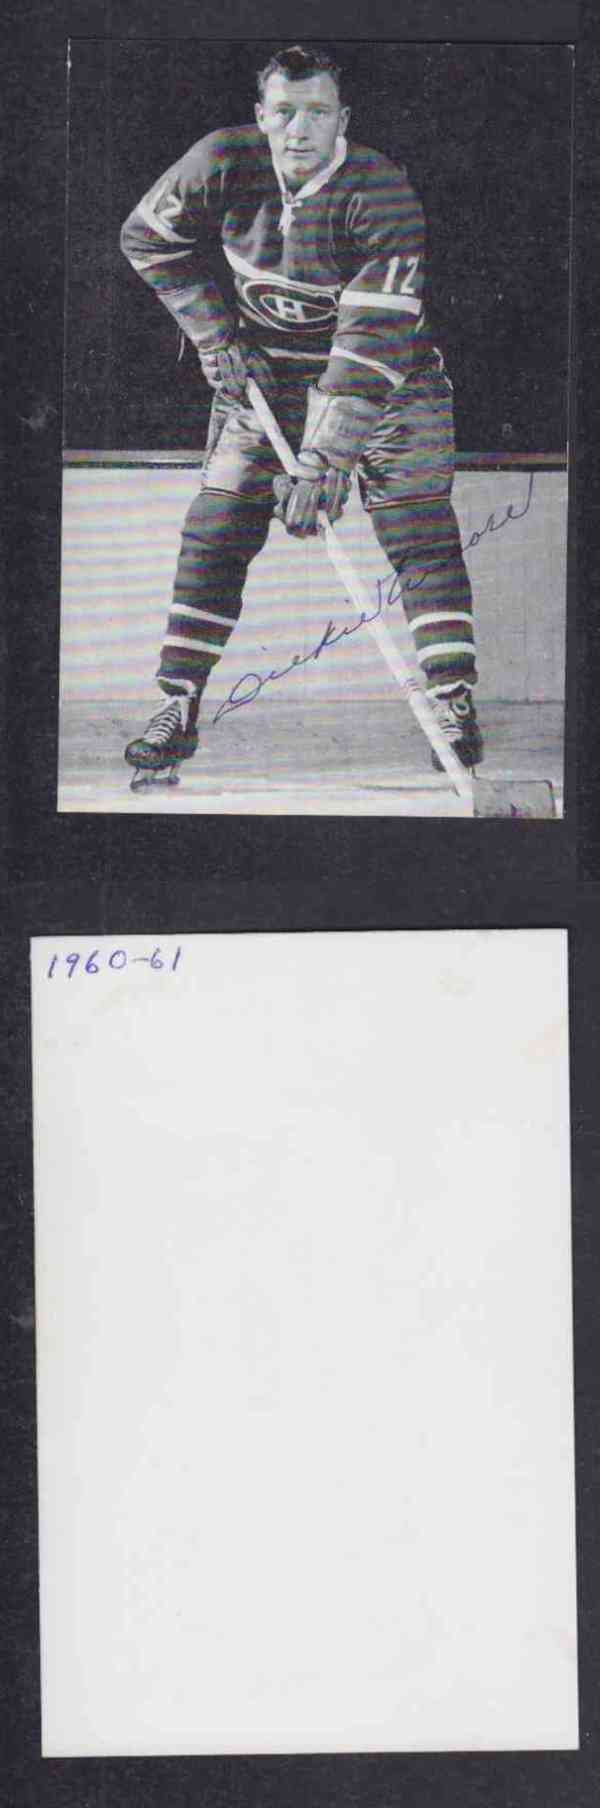 1960 'S MONTREAL CANADIENS D.MOORE  AUTOGRAPHED POST CARD  photo